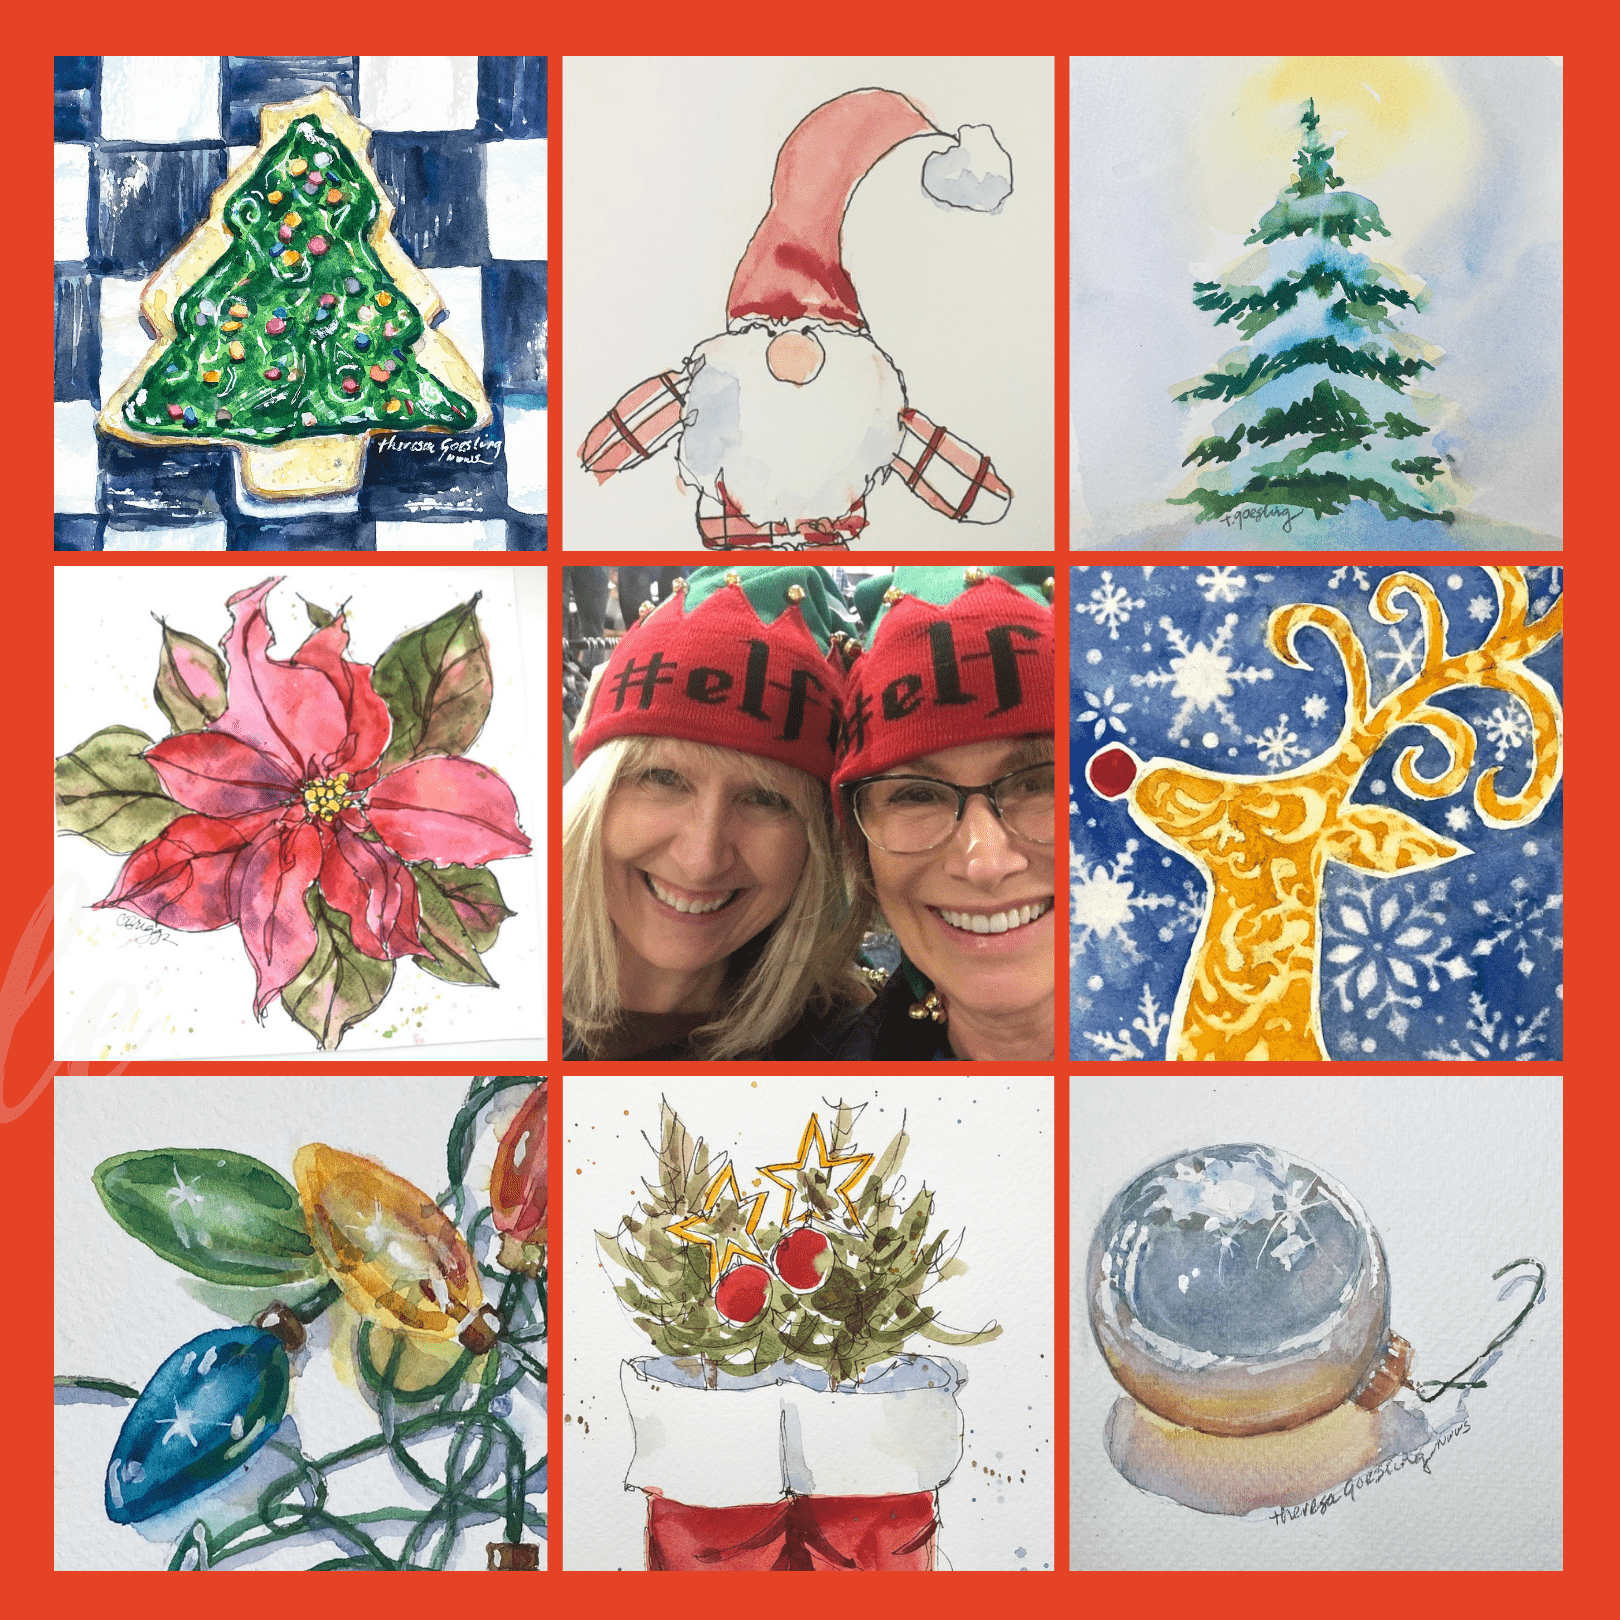 Theresa Cindy Holiday Collage 2021